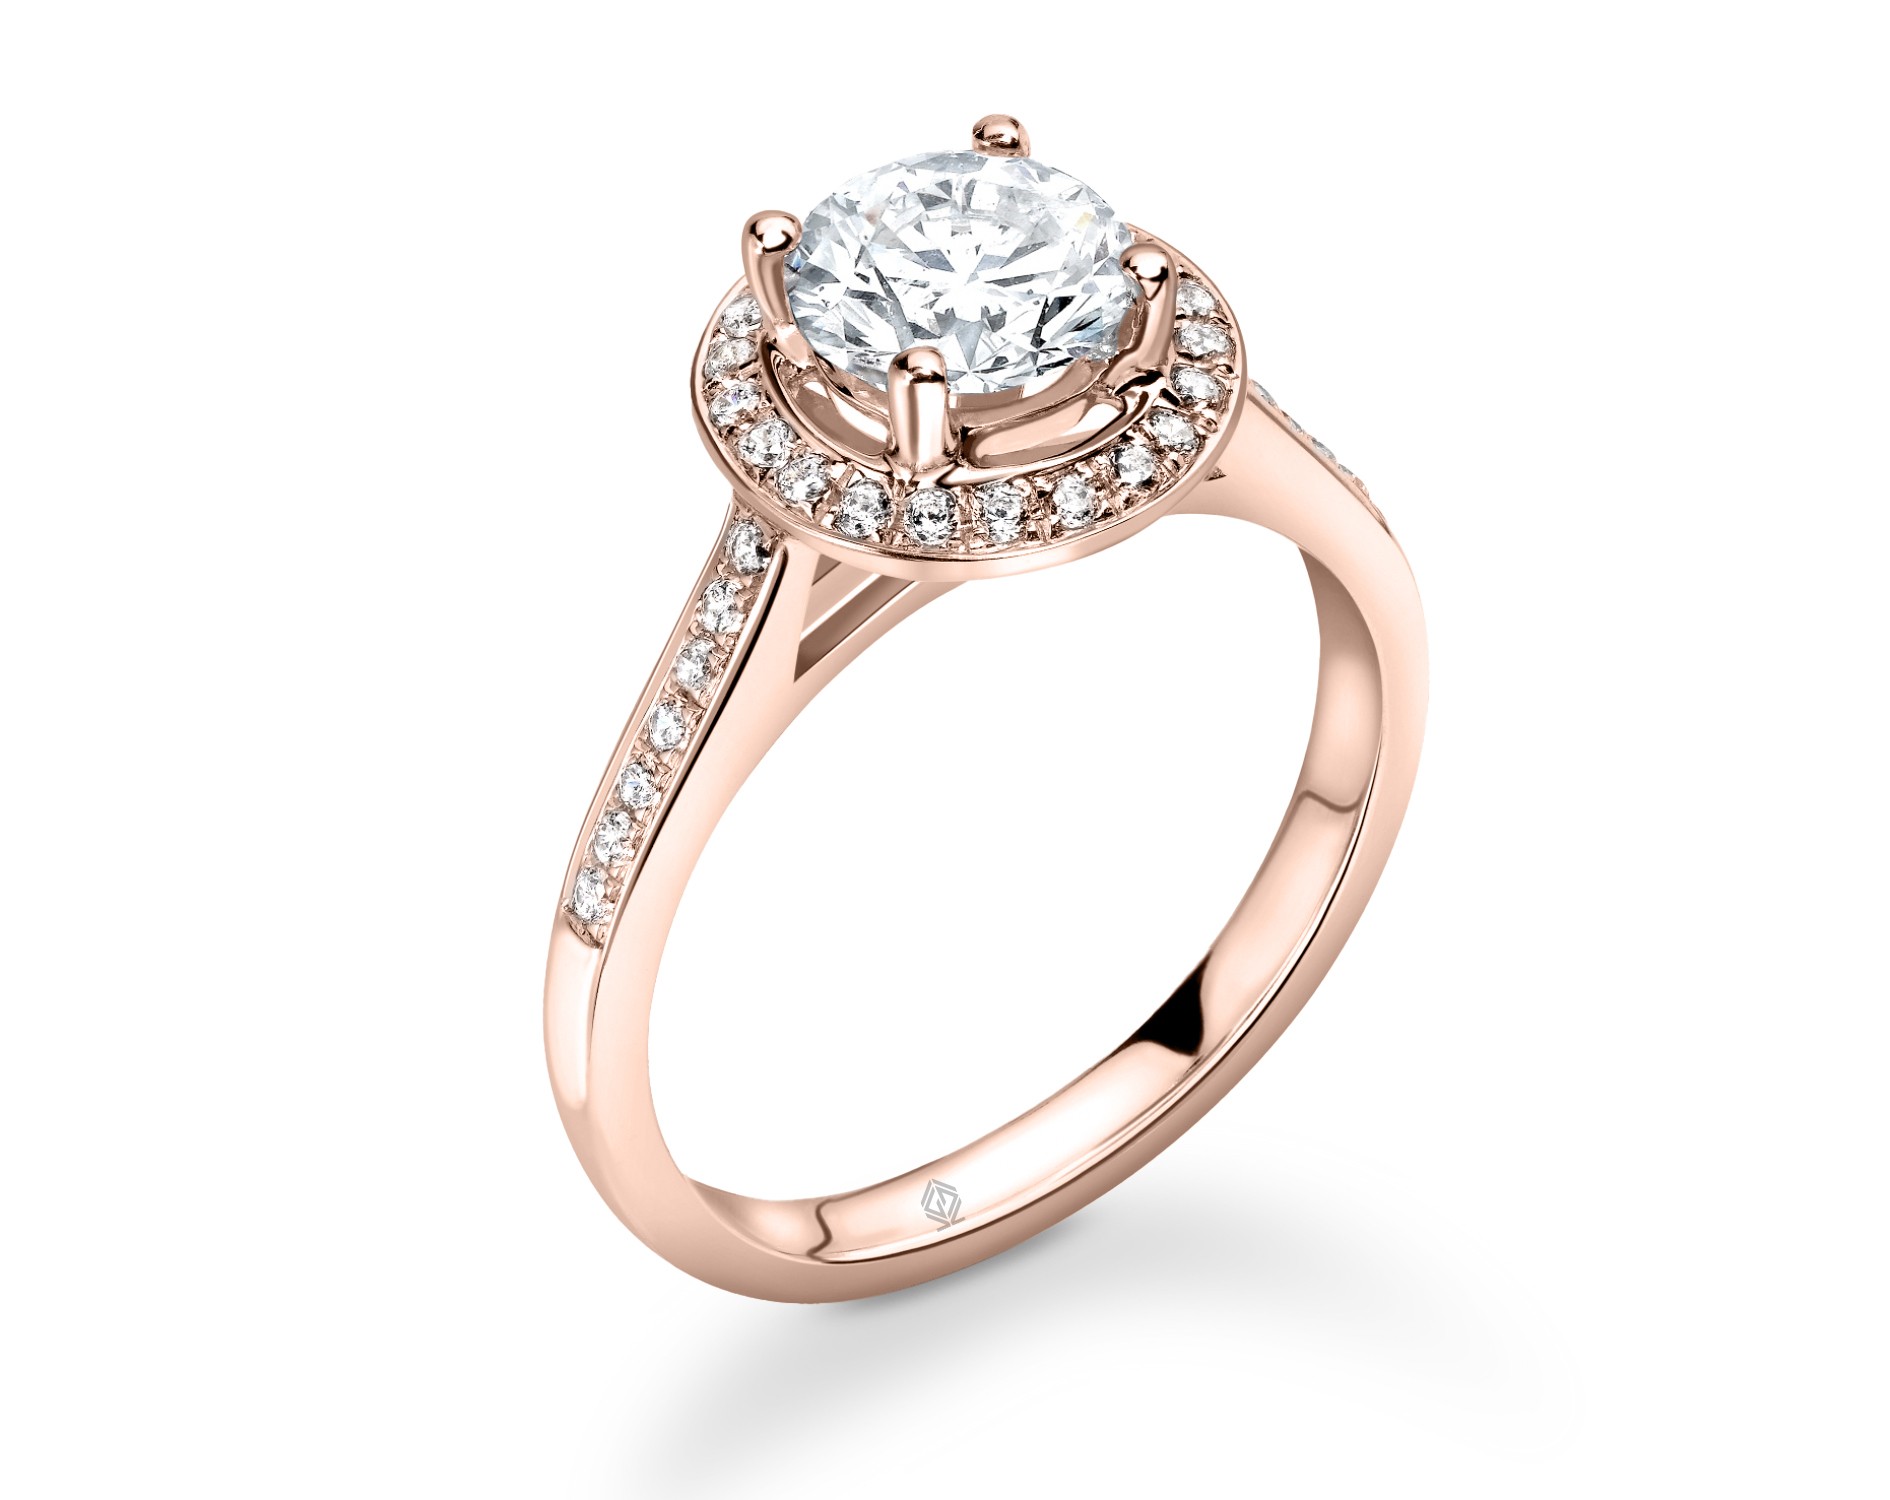 18K ROSE GOLD HALO ROUND CUT DIAMOND ENGAGEMENT RING WITH SIDE STONES CHANNEL SET